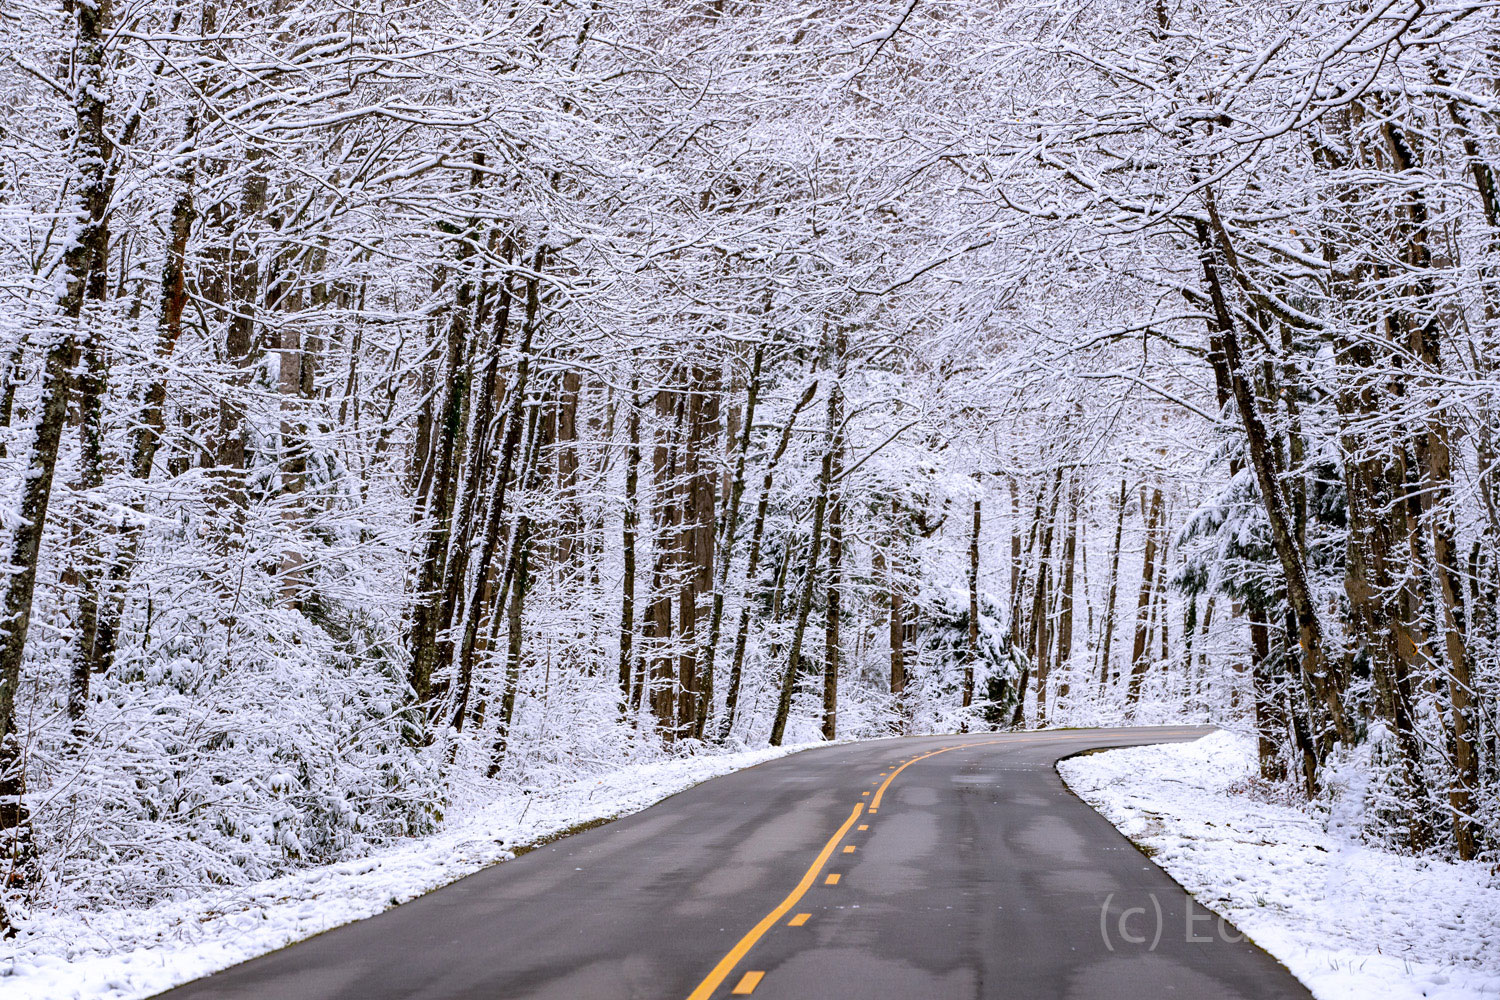 Laurel Creek road leads to Cades Cove.  Normally crowded it is deserted this day after a recent snow.